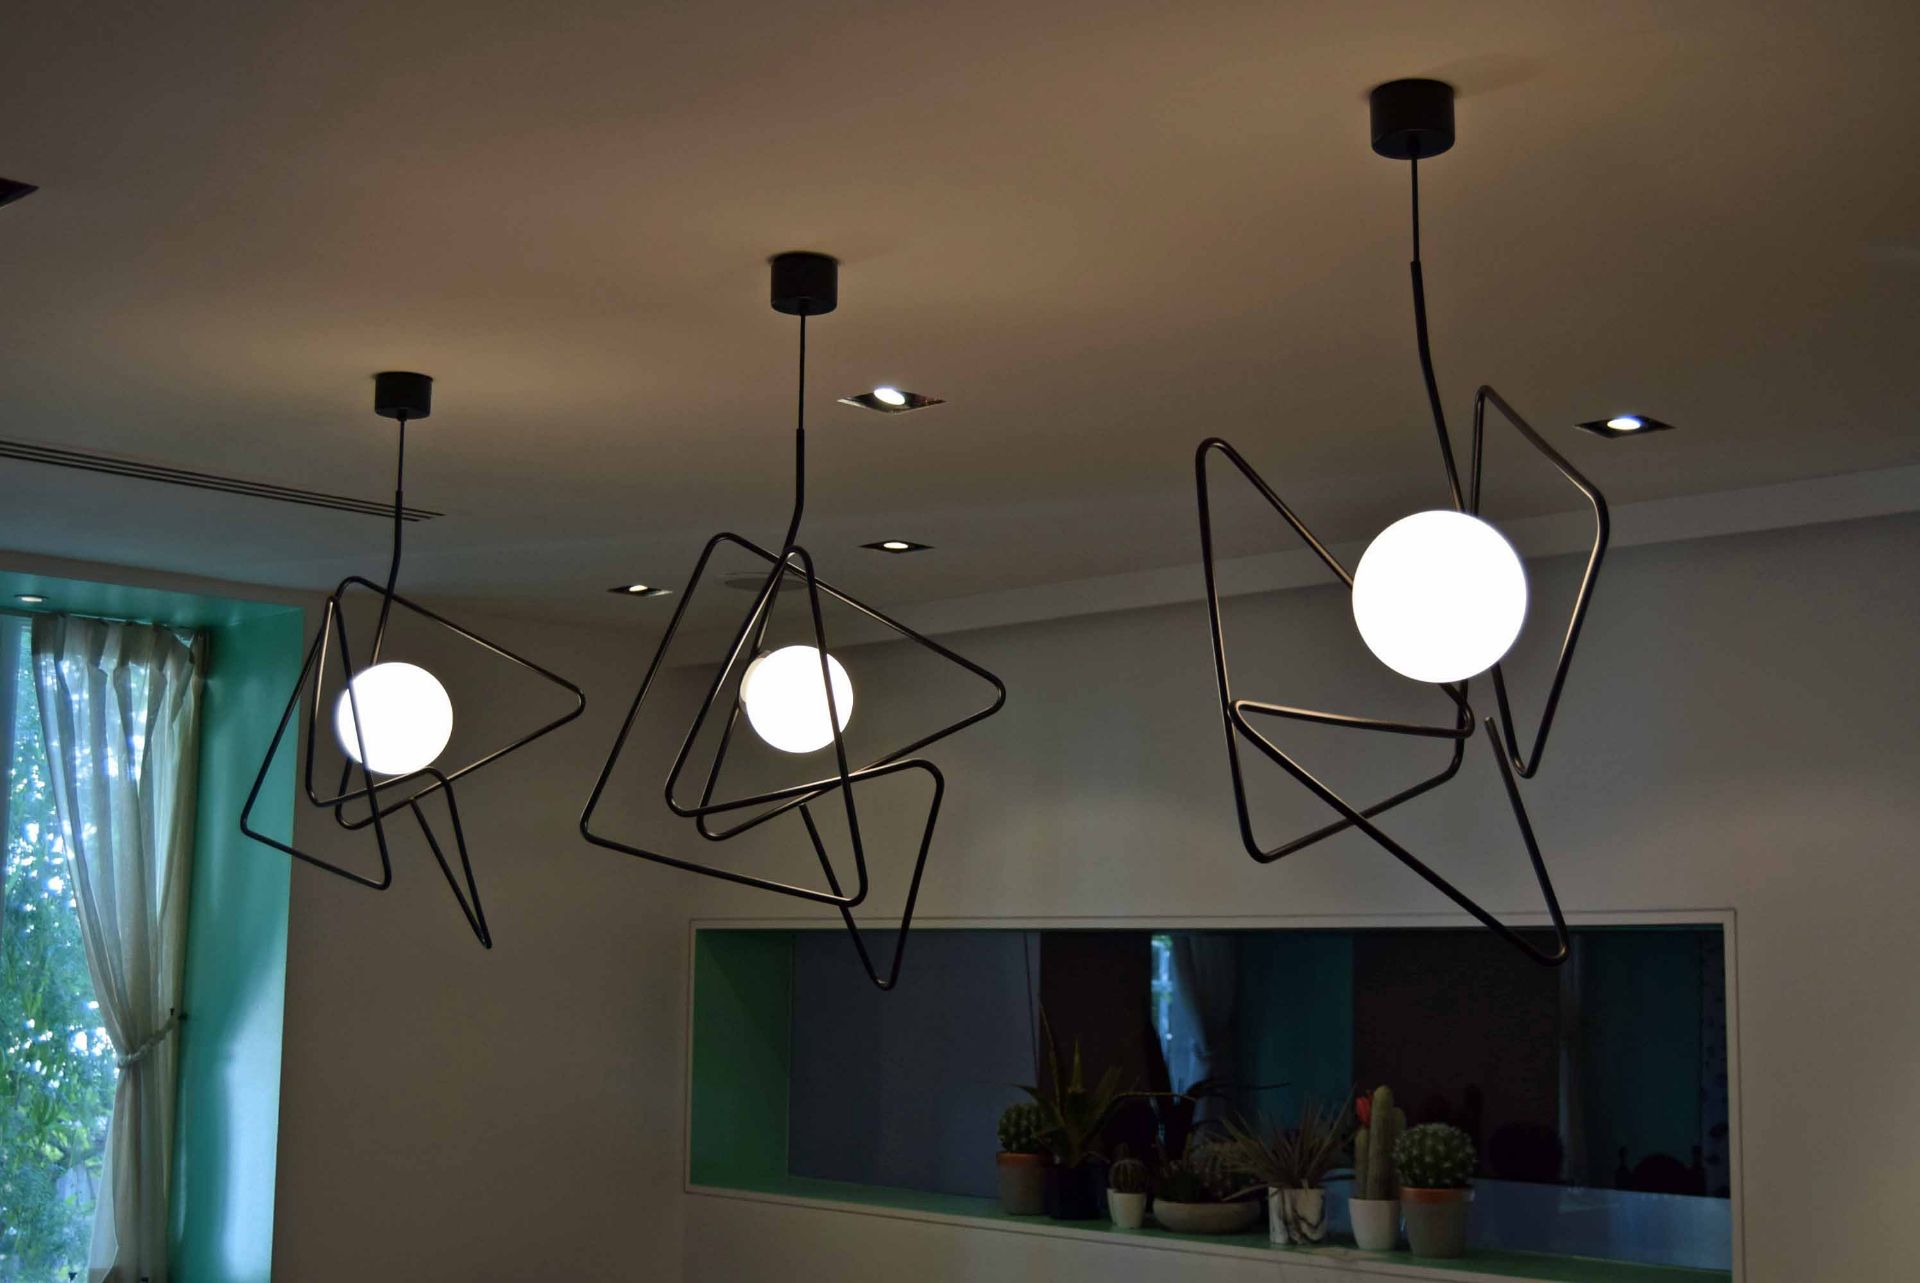 Three Abstract Design Globe Pendant Lights (Risk Assessment and Method Statement are required for - Image 2 of 2